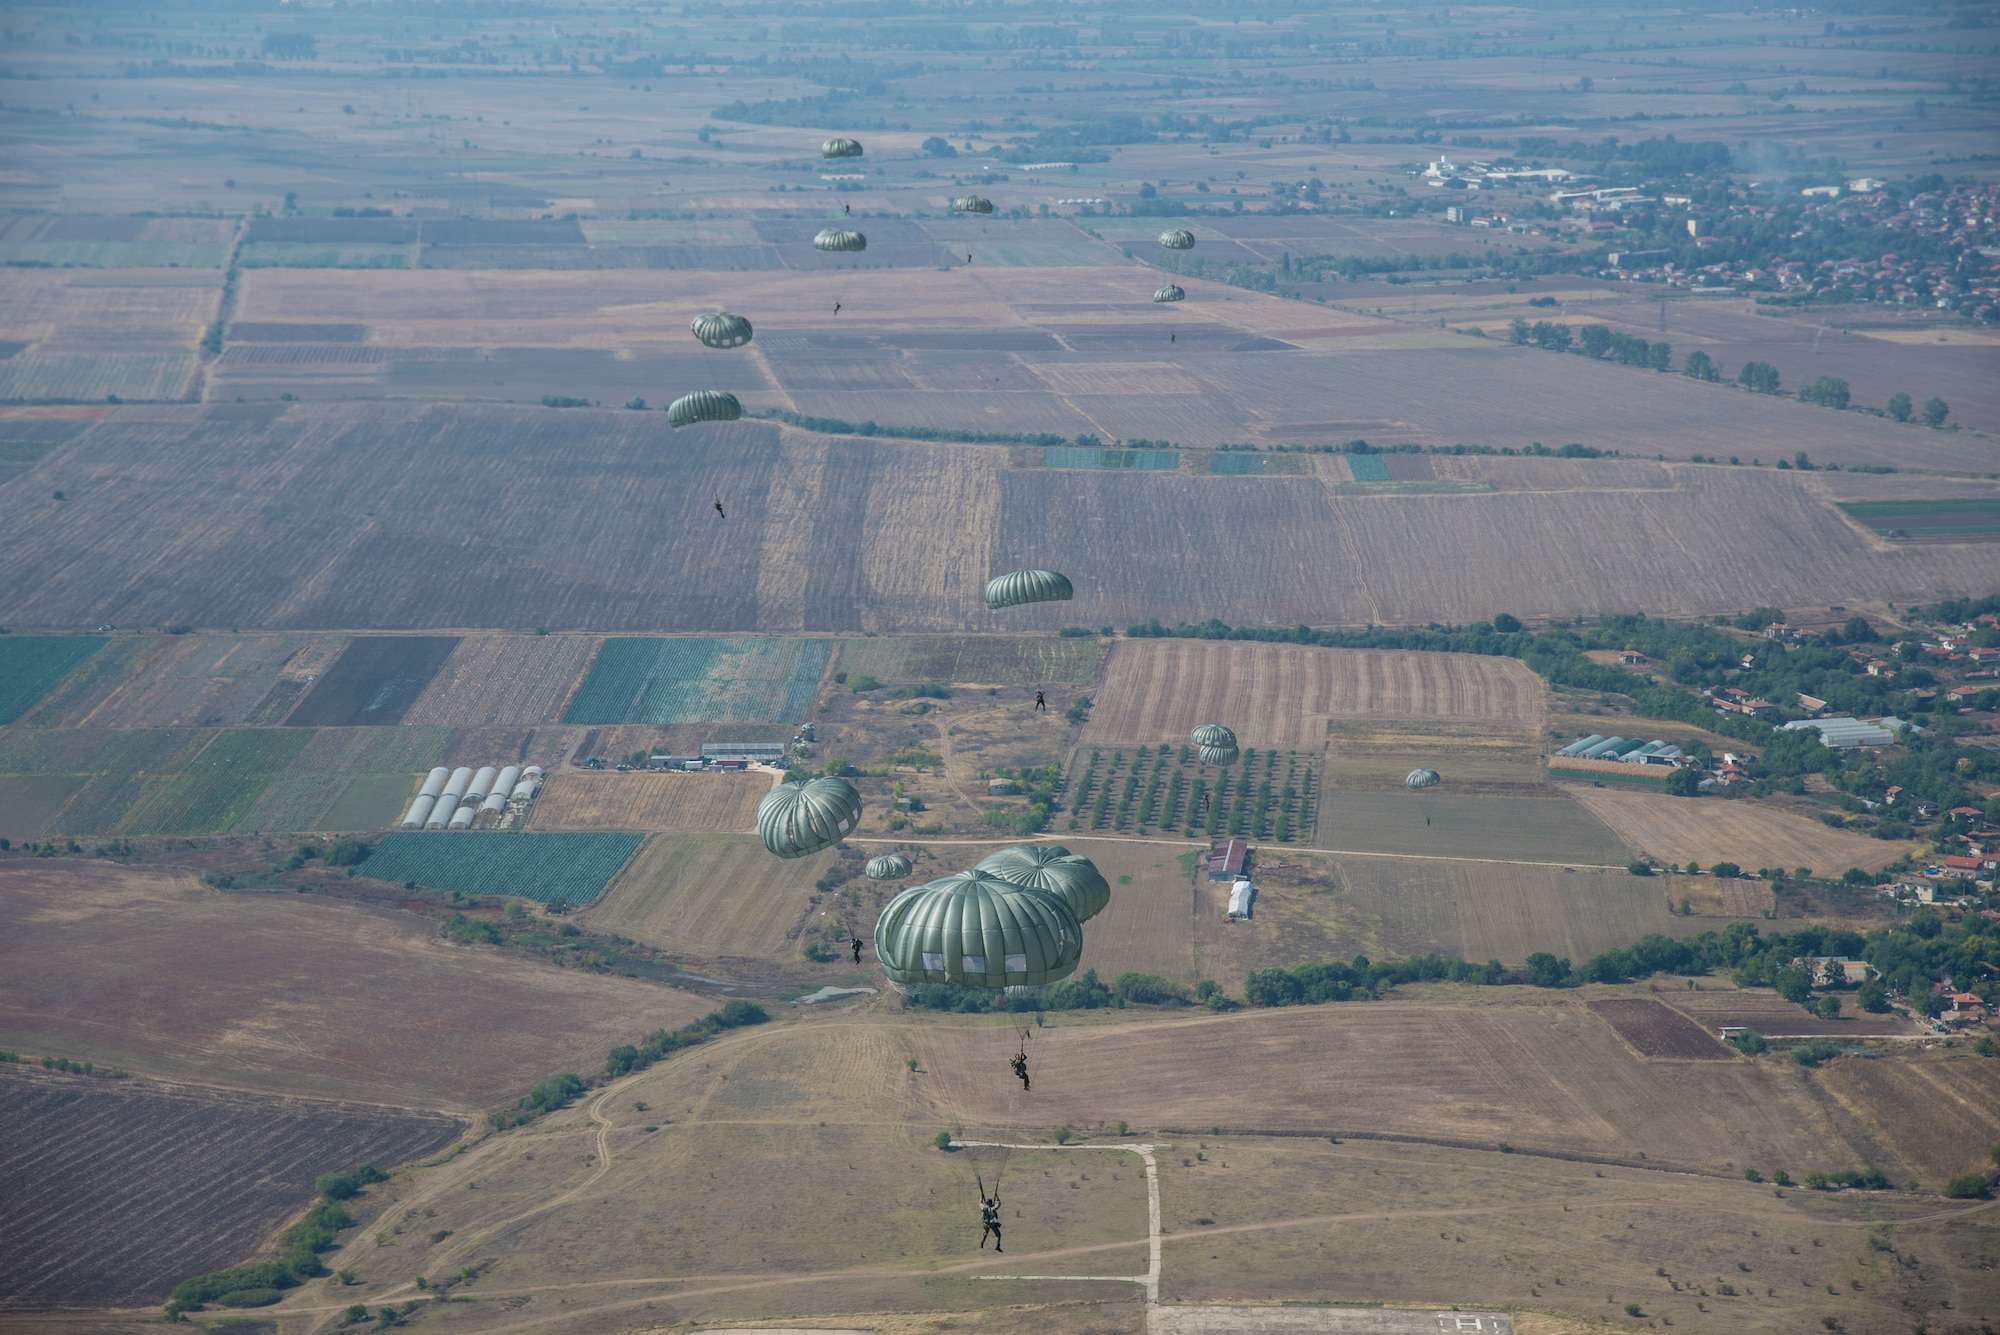 A group of Bulgarian paratroopers descend into Cheshnegirovo drop zone after performing a static-line jump in Plovdiv, Bulgaria, Oct. 2, 2019. During Thracian Fall, the 37th Airlift Squadron provided primary airlift support to a U.S.-sponsored military free-fall course for Bulgaria’s 68th Special Forces Brigade, resulting in a total of 121 personnel drops. (U.S. Air Force photo by Staff Sgt. Kirsten Brandes)